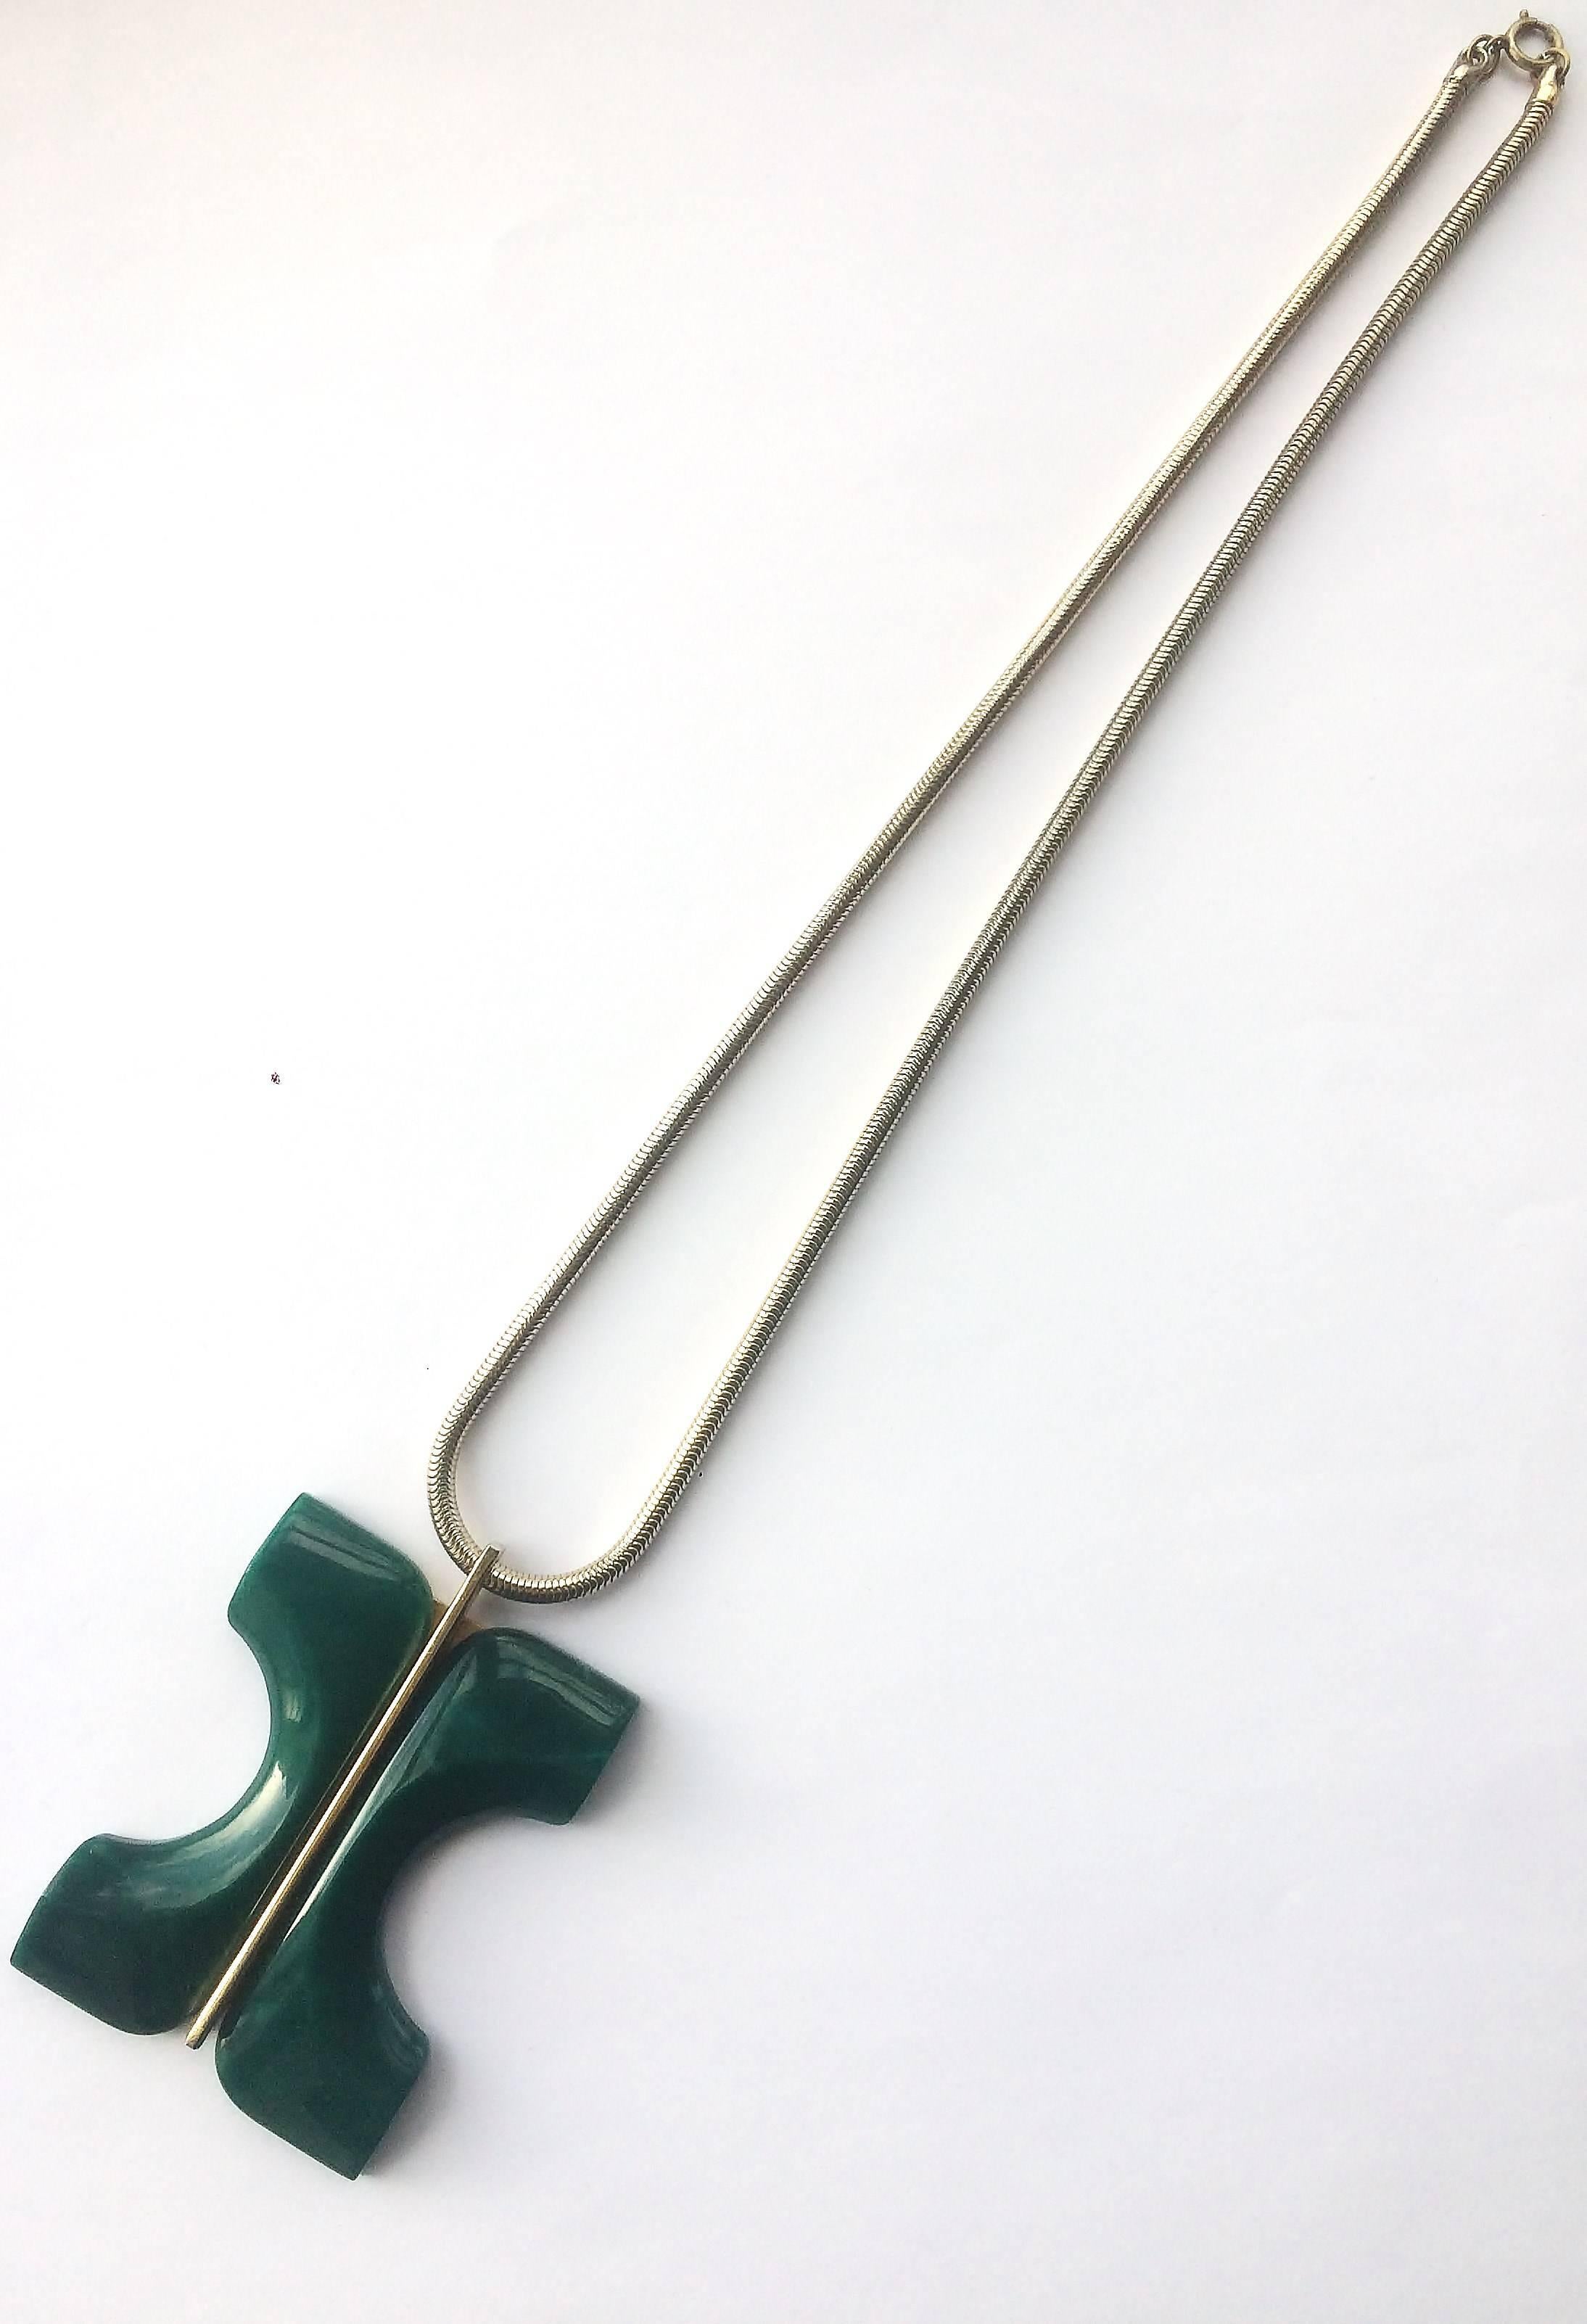 An unsigned forest green lucite pendant by Jeanne Lanvin from the 1970s, one of a collection created at this time by this fashion house, and very much of this period. The lucite is slightly marbled and is a very warming colour. Suspended on an 18ct